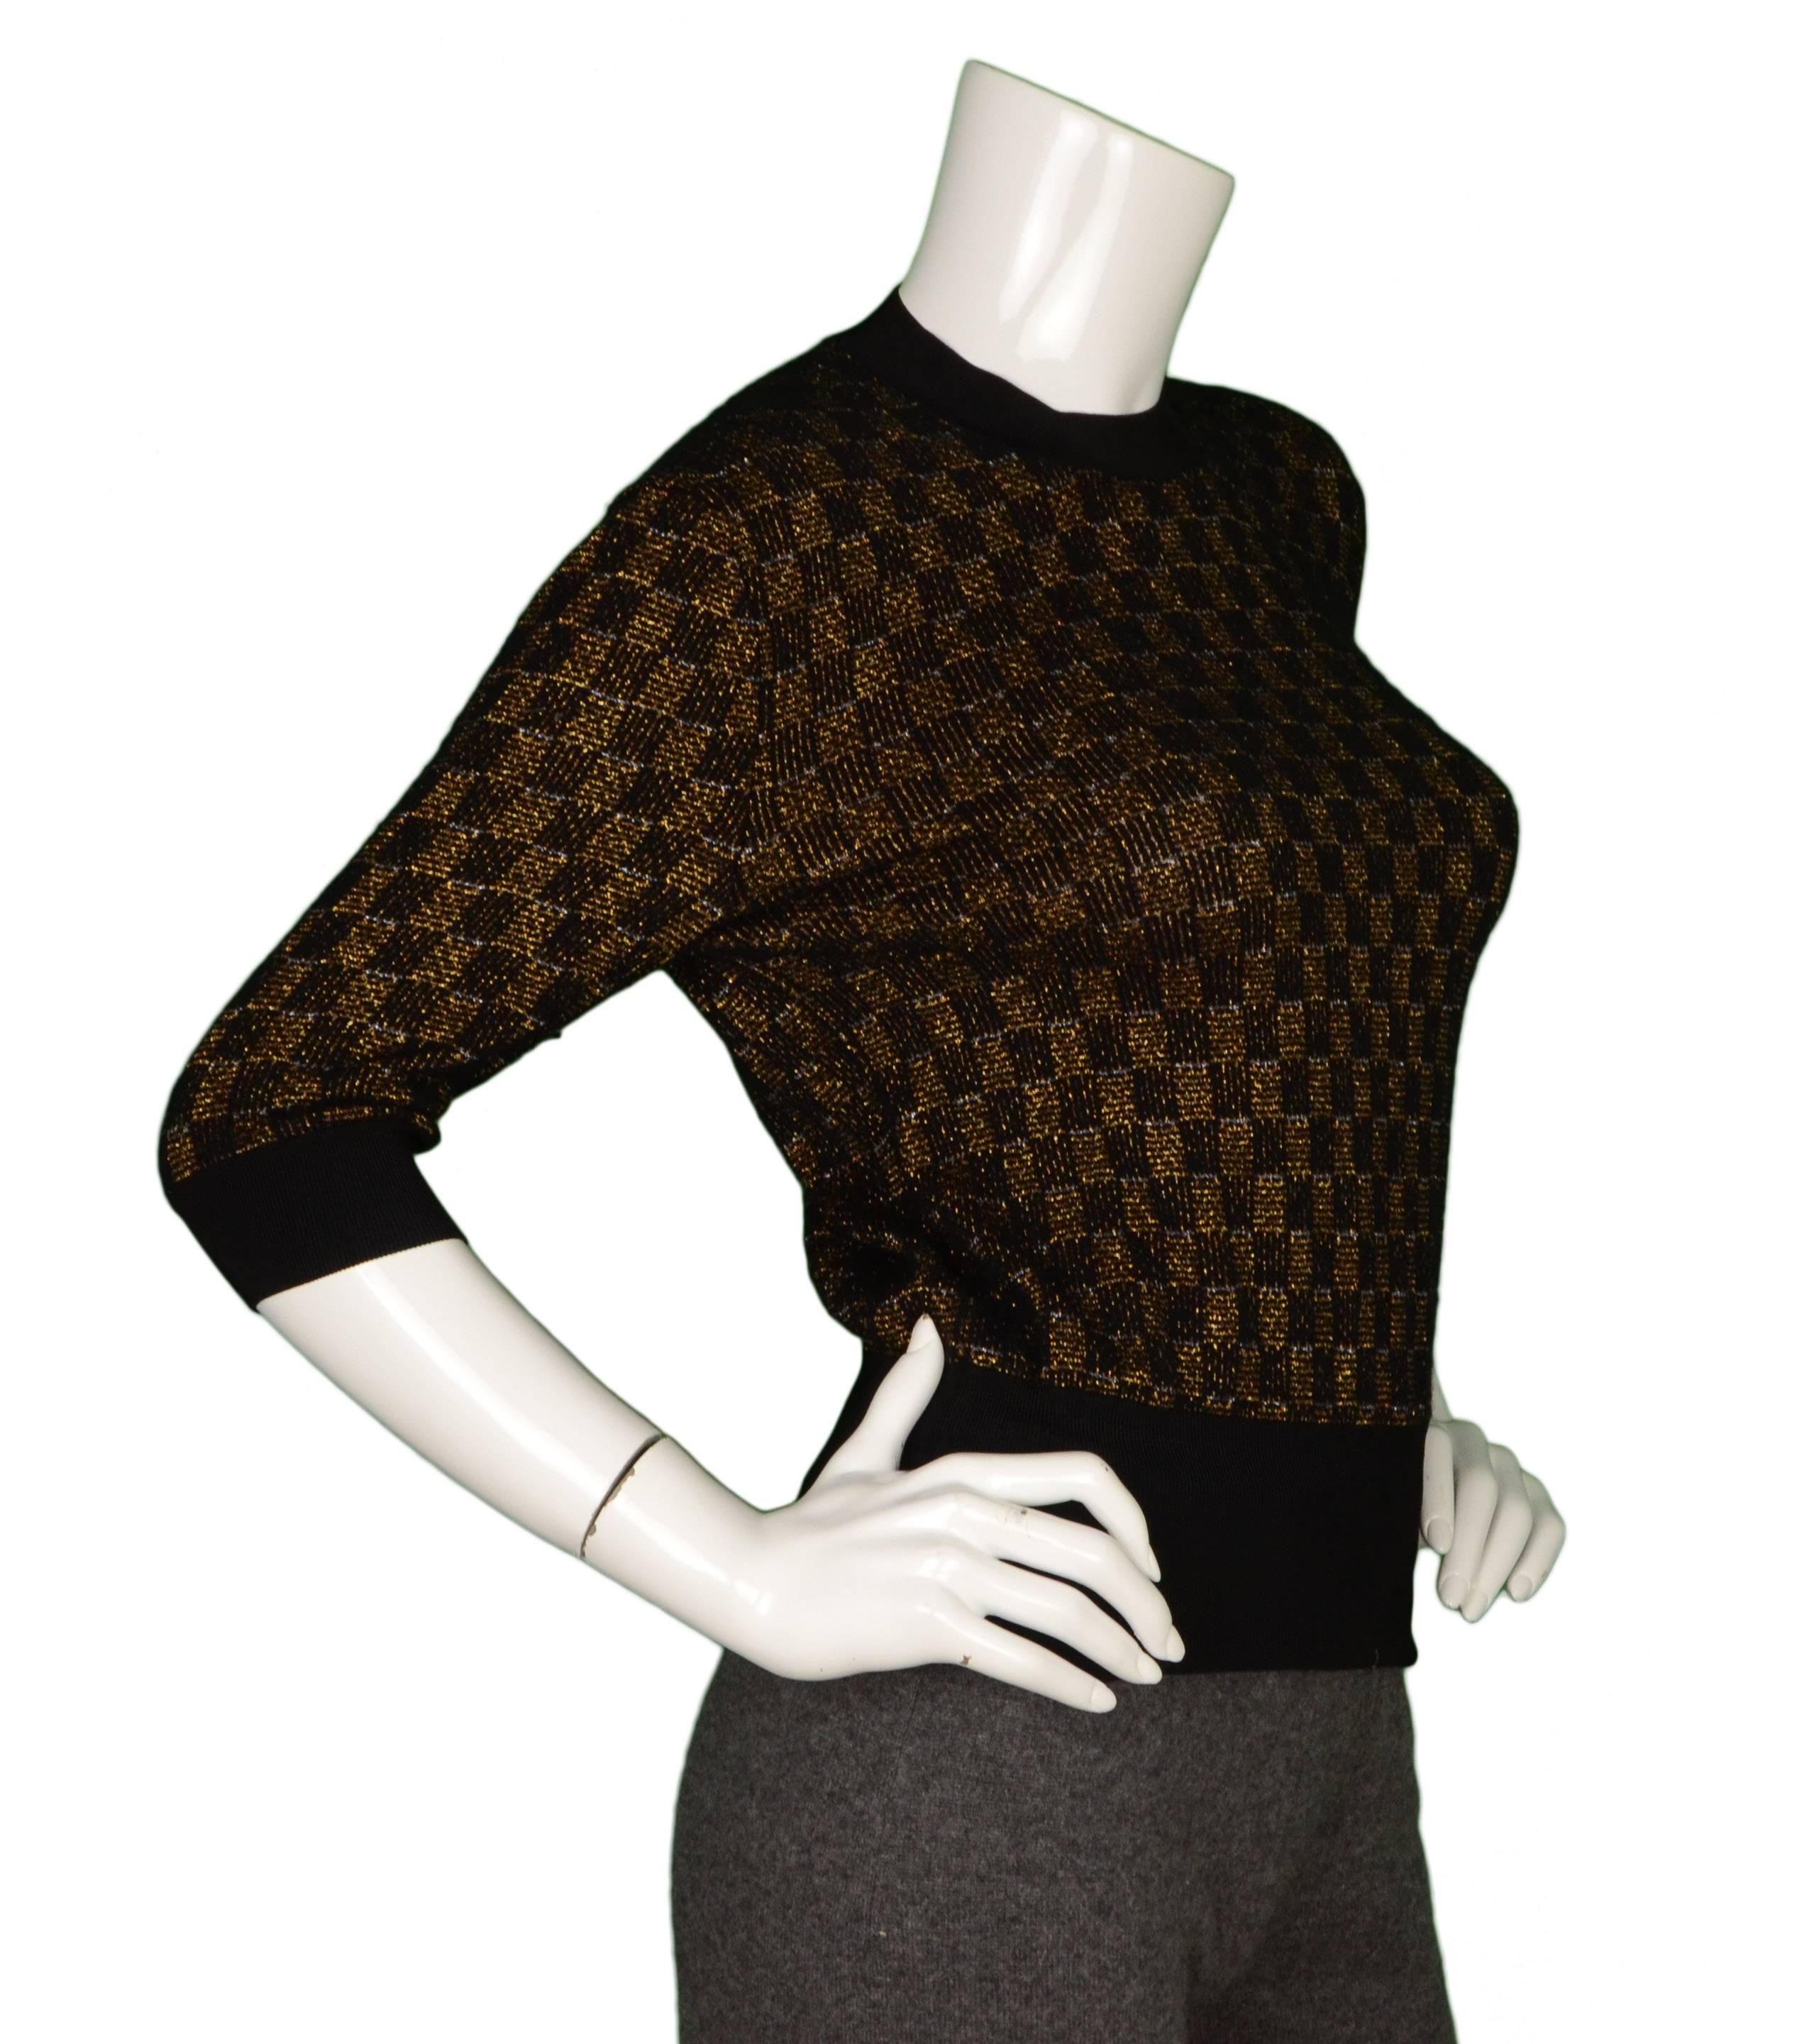 Louis Vuitton Black & Gold Knit Short Sleeve Top 
Made In: Italy
Color: Black and gold
Composition: 42% cashmere, 38% viscose, 8% polyamide, 6% cupro, 4% polyester, 2% elastane
Lining: None
Closure/Opening: Pull over top
Exterior Pockets: